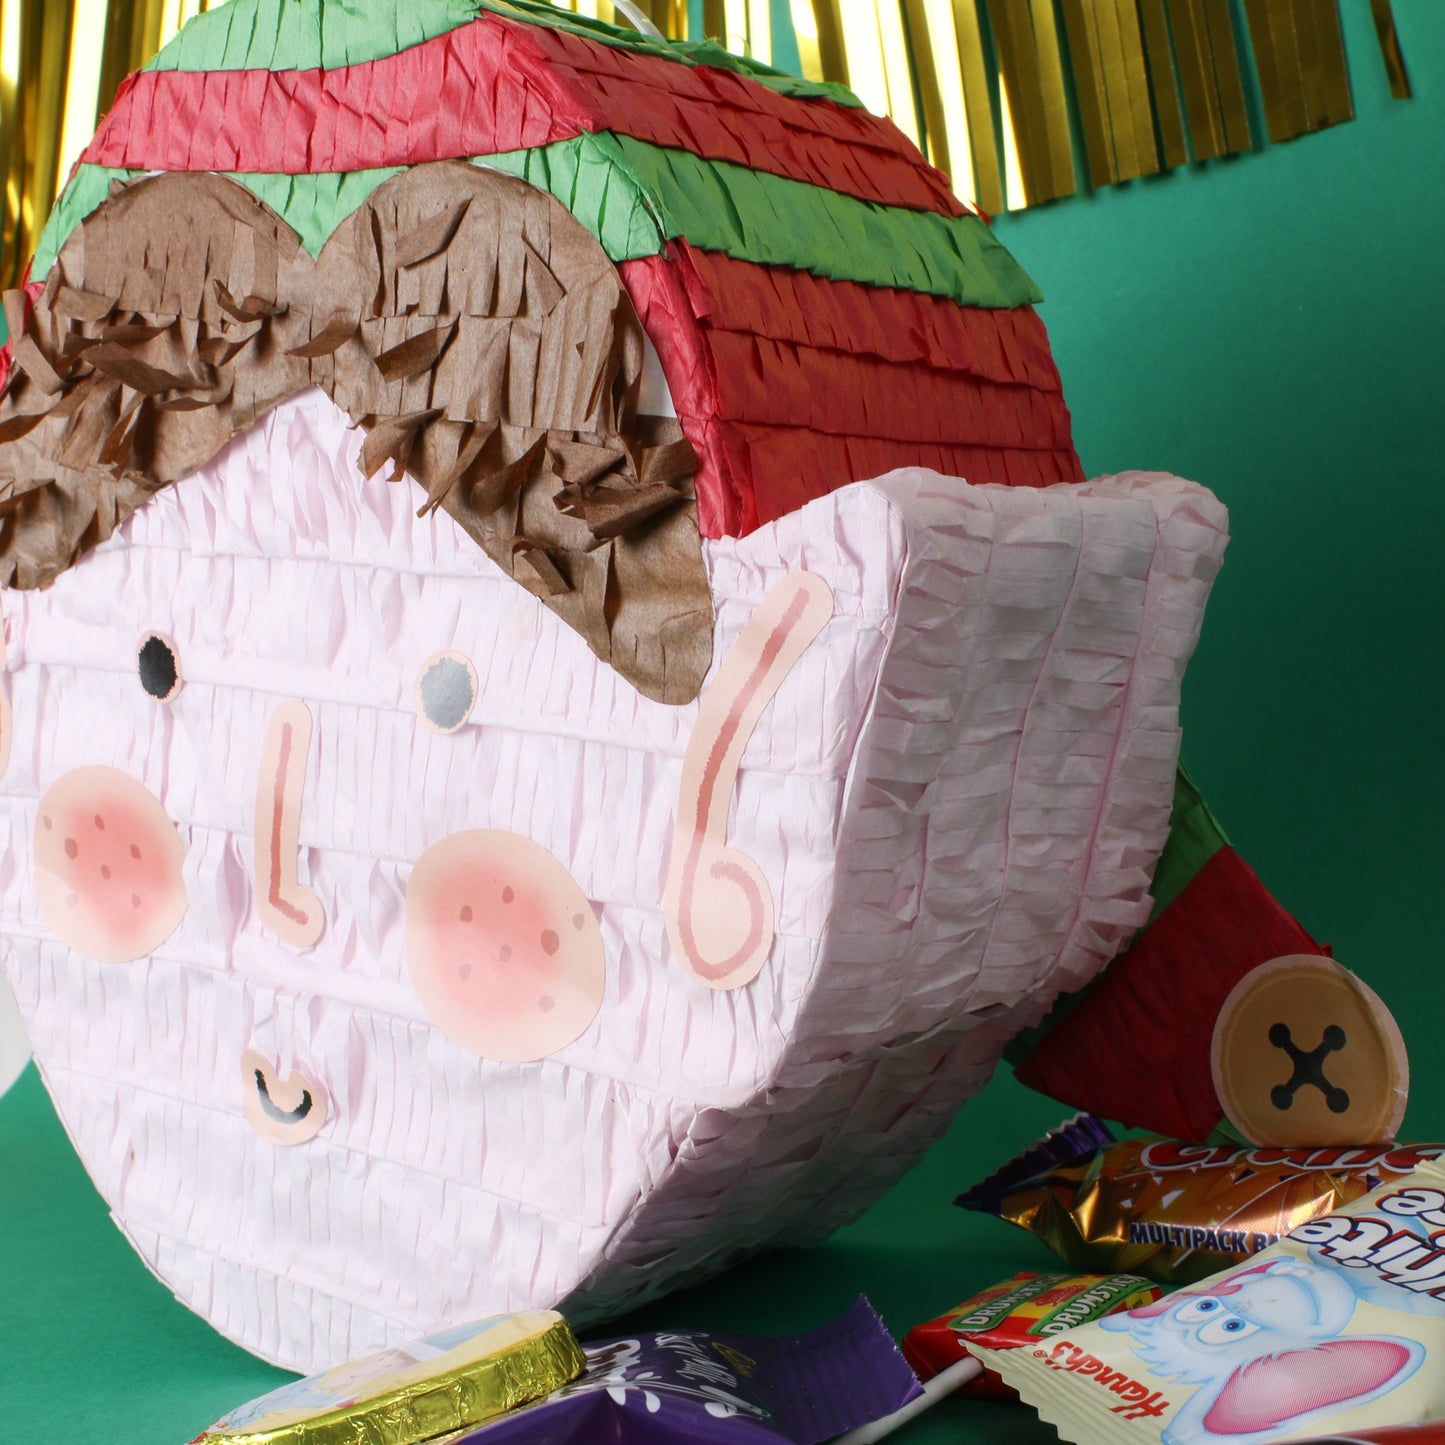 ELF PINATA WITH FACE STICKERS